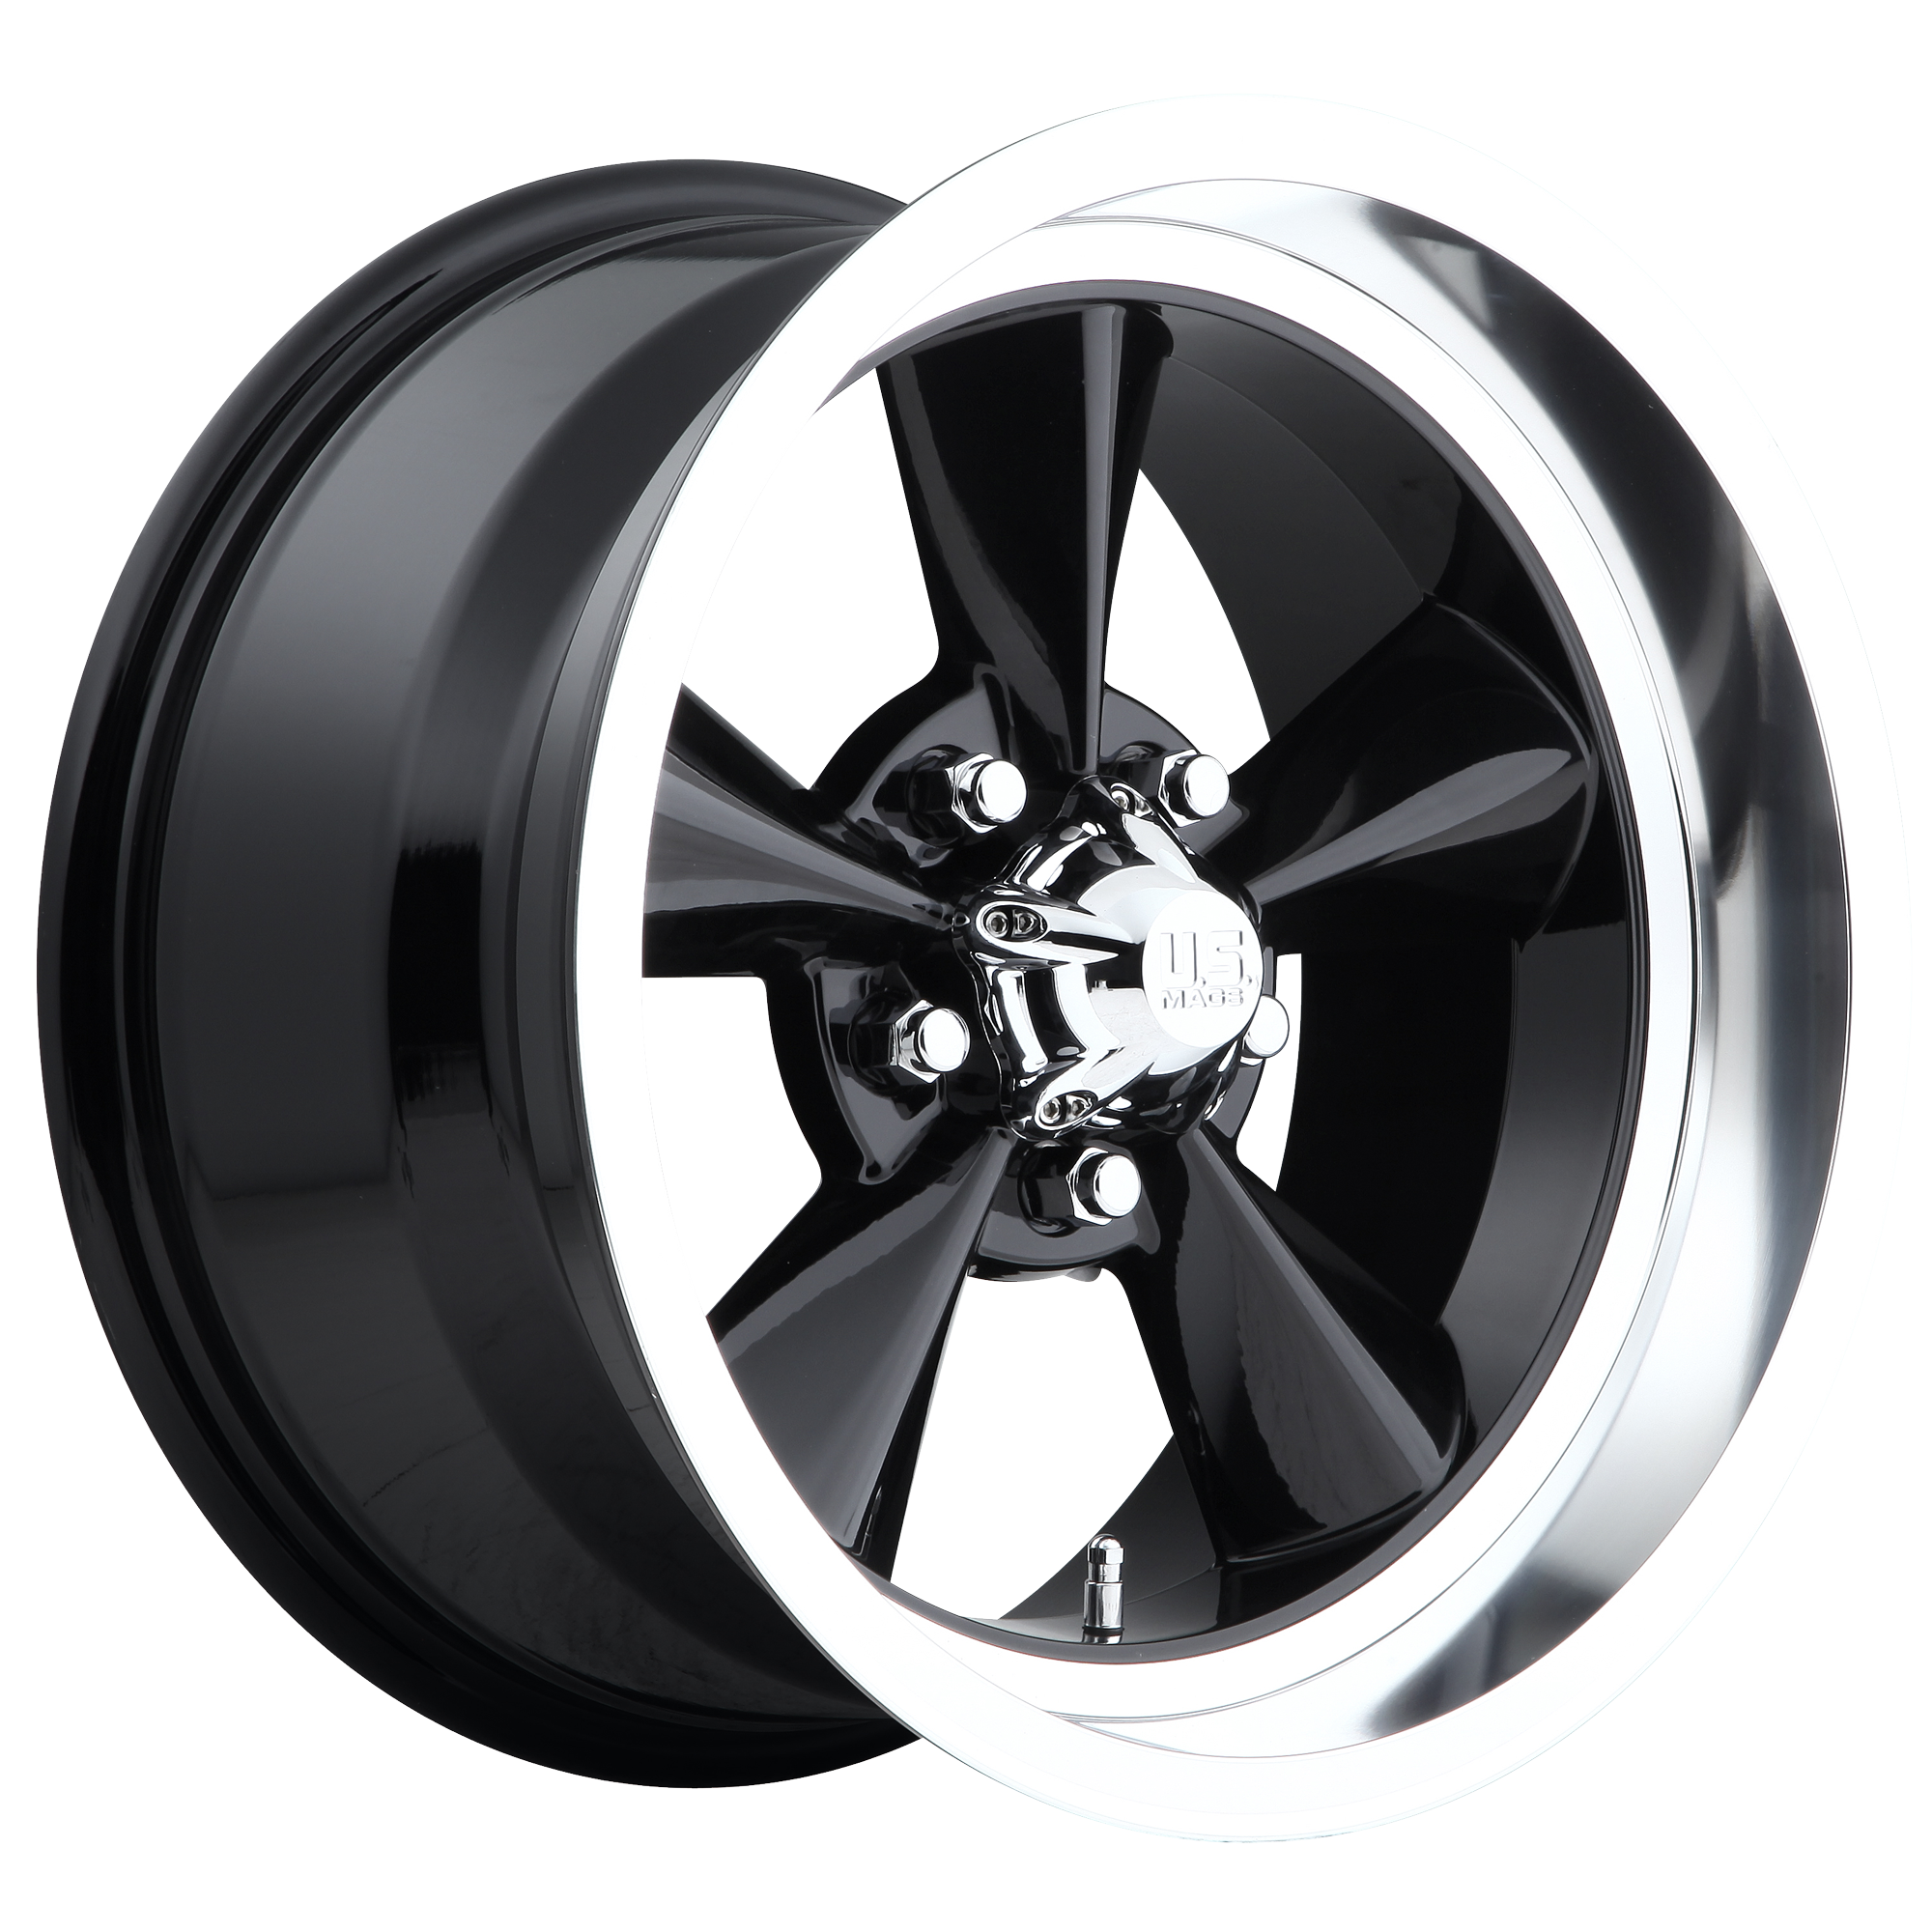 STANDARD 15x8 5x120.65 GLOSS BLACK (1 mm) - Tires and Engine Performance